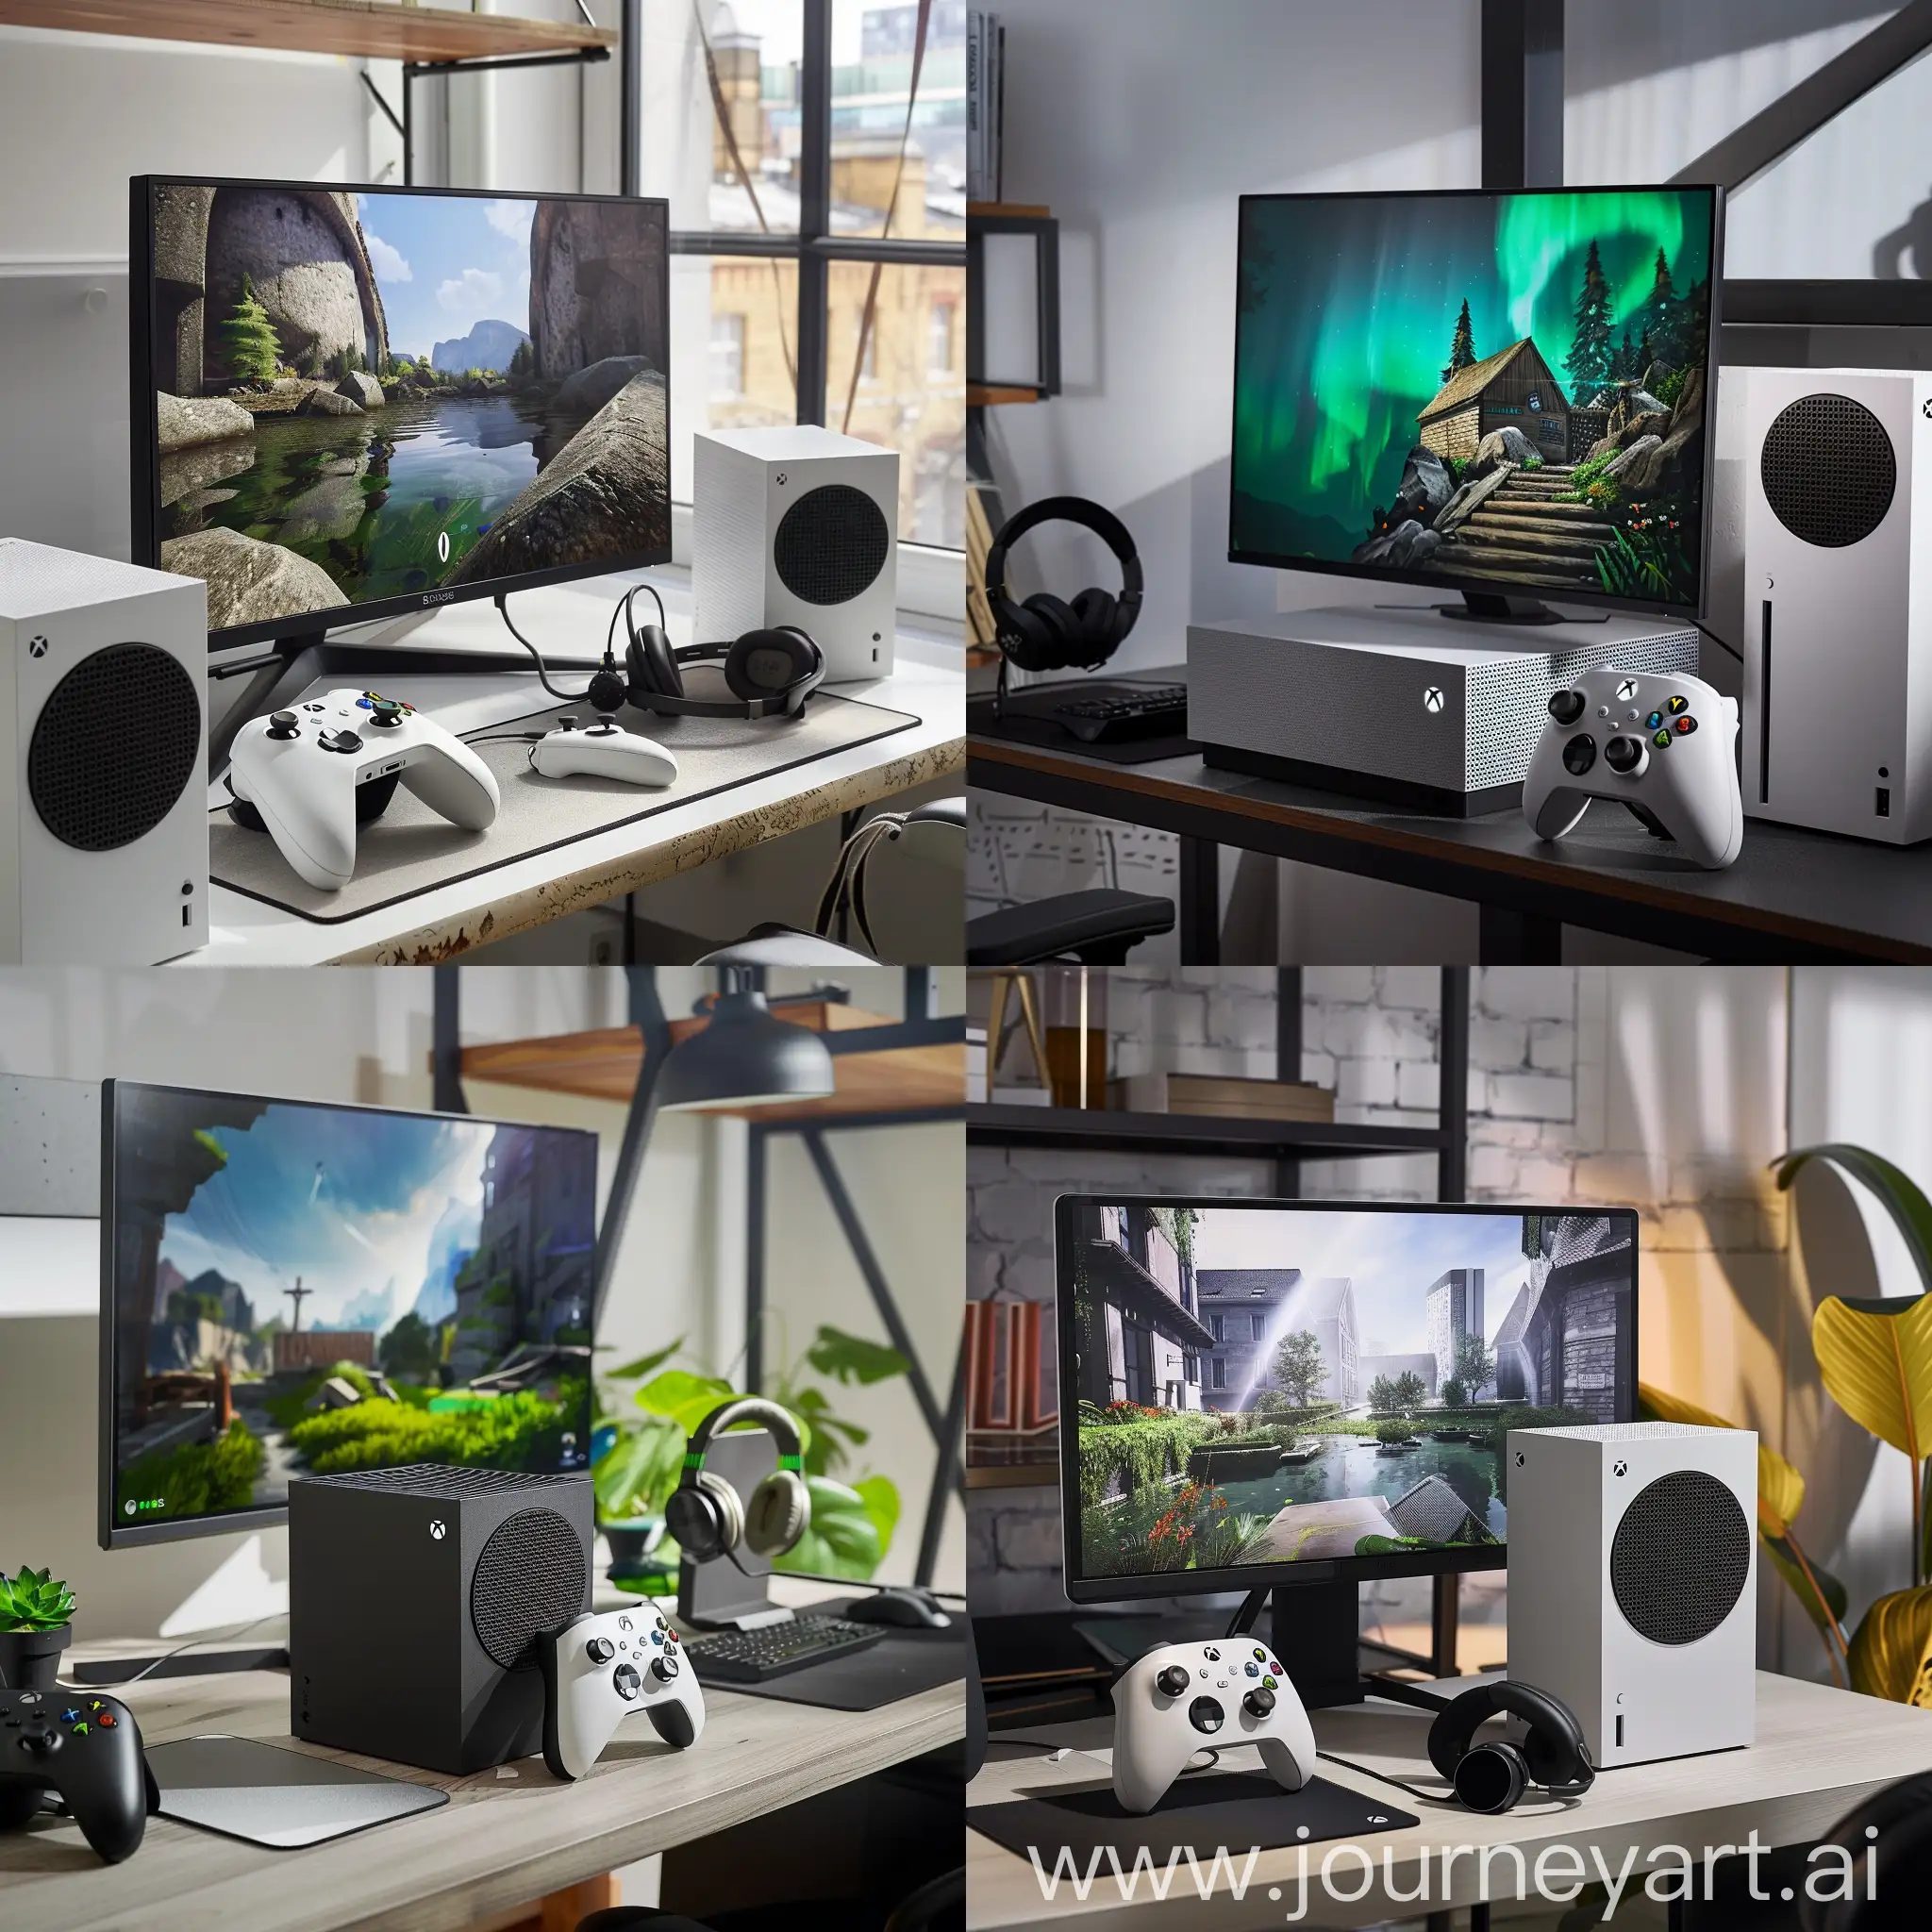 Immersive-Gaming-Setup-with-Xbox-Series-S-Monitor-and-Headphones